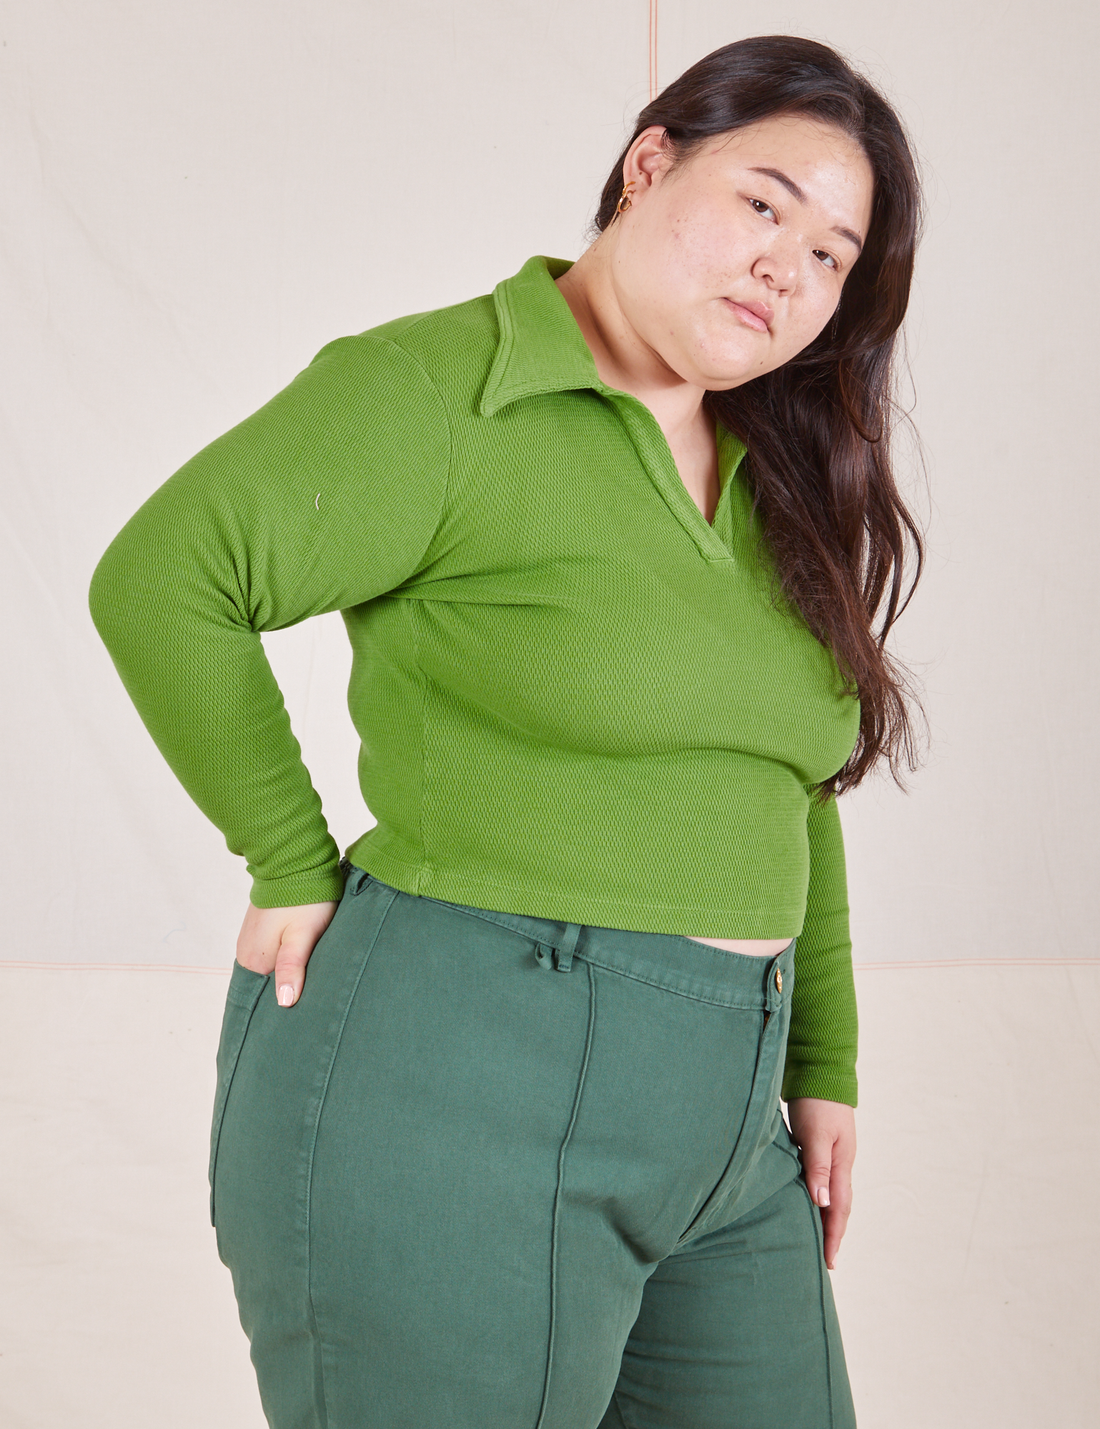 Long Sleeve Fisherman Polo in Bright Olive side view on Ashley wearing dark emerald green Western Pants